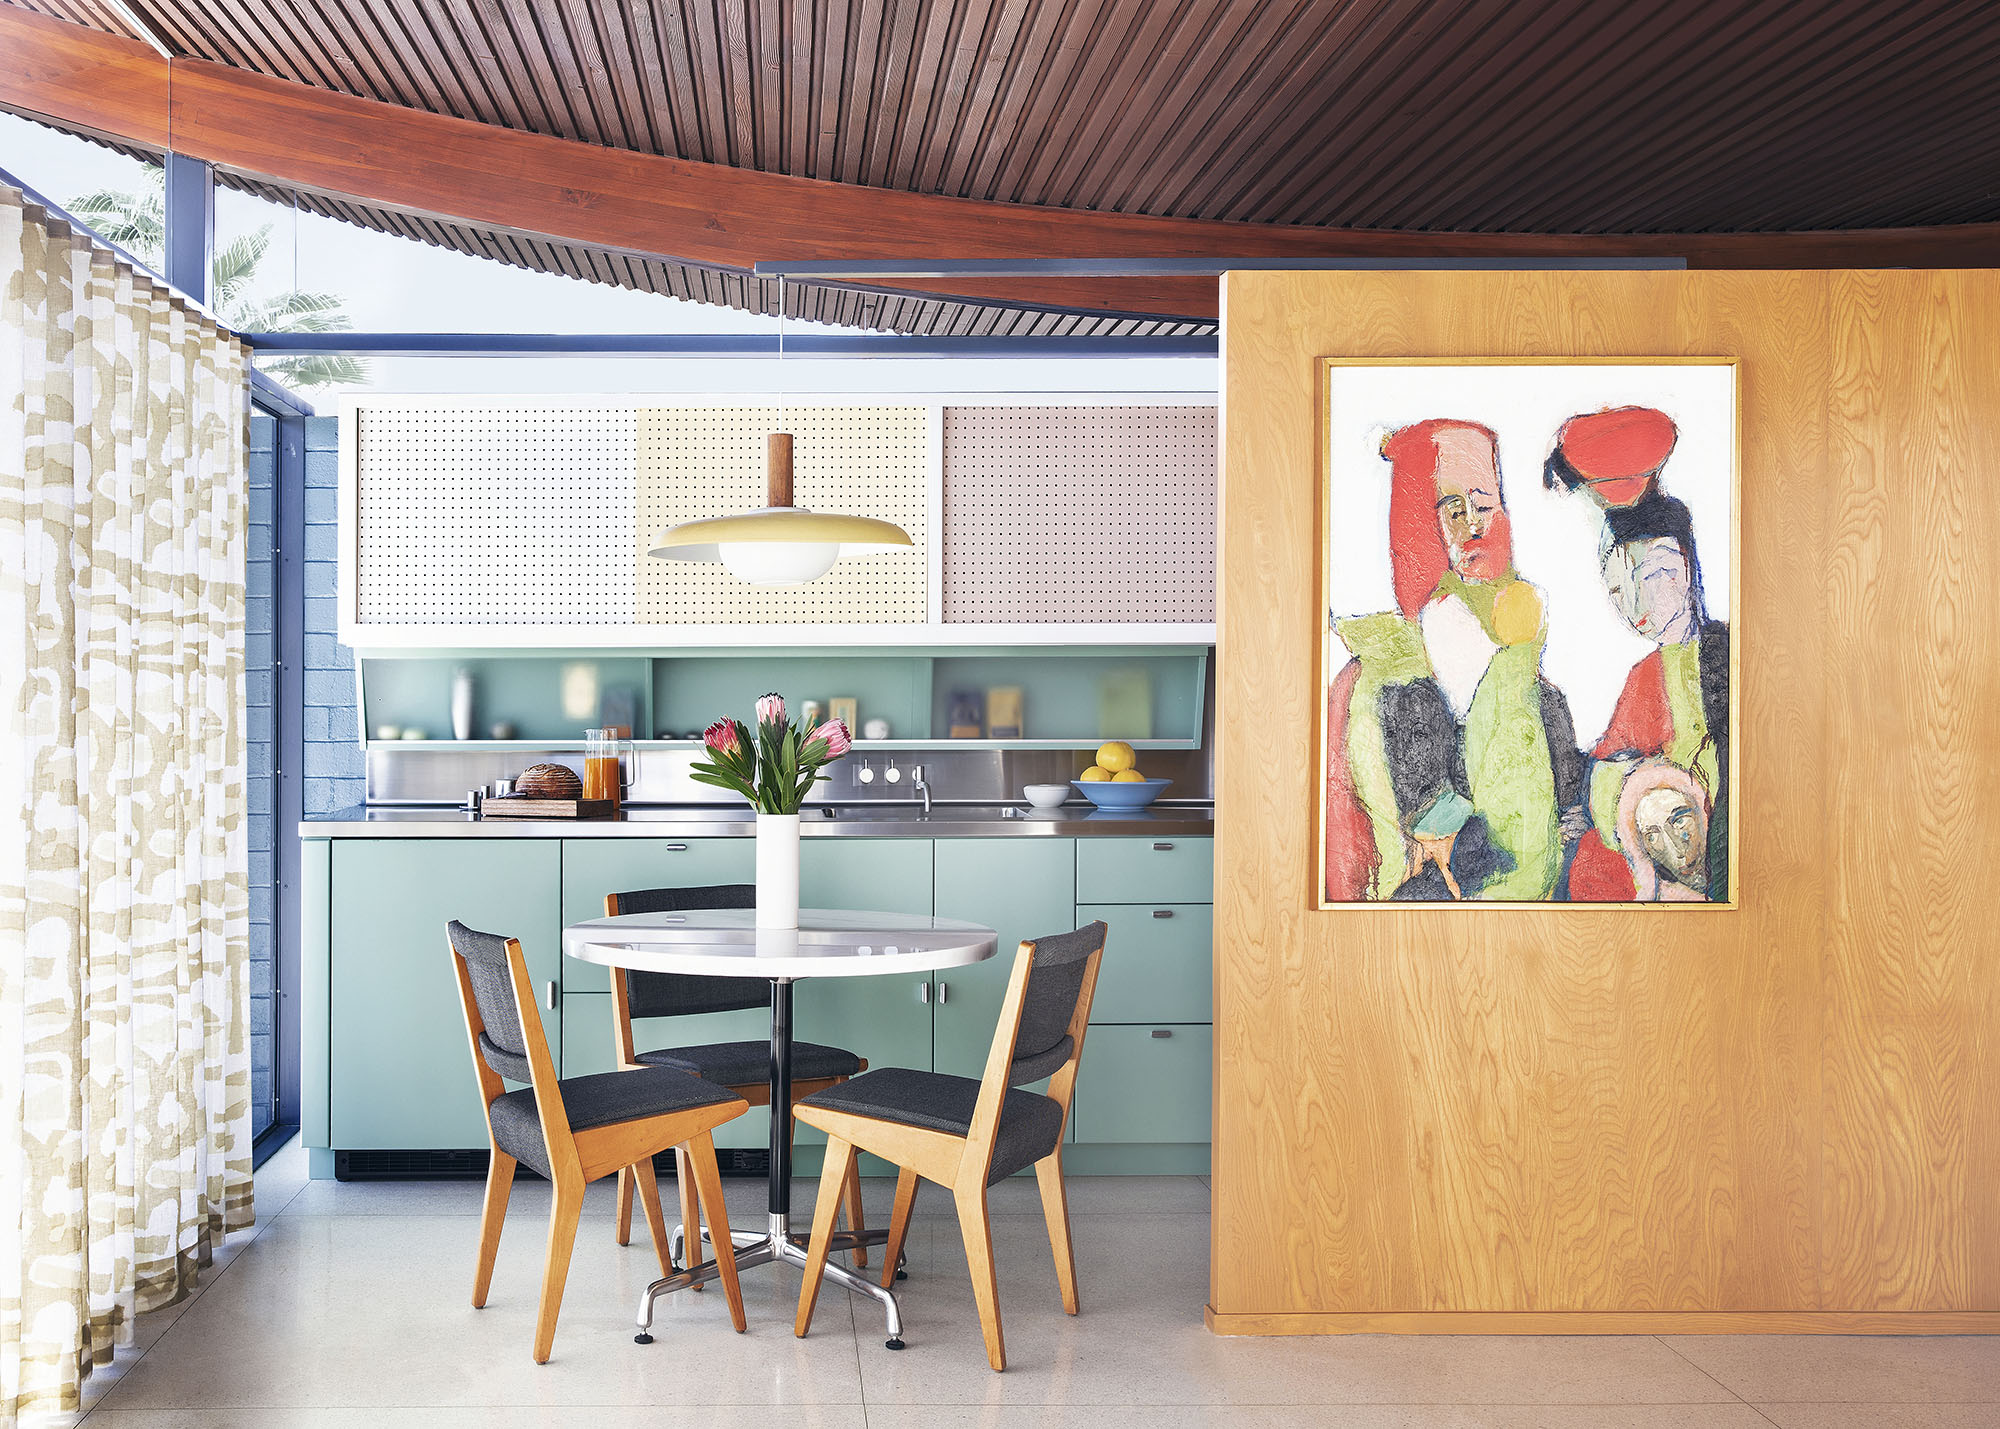 image of an eat-in kitchen with wooden furniture, art work, aqua blue cabinetry, an a curvilinear celing